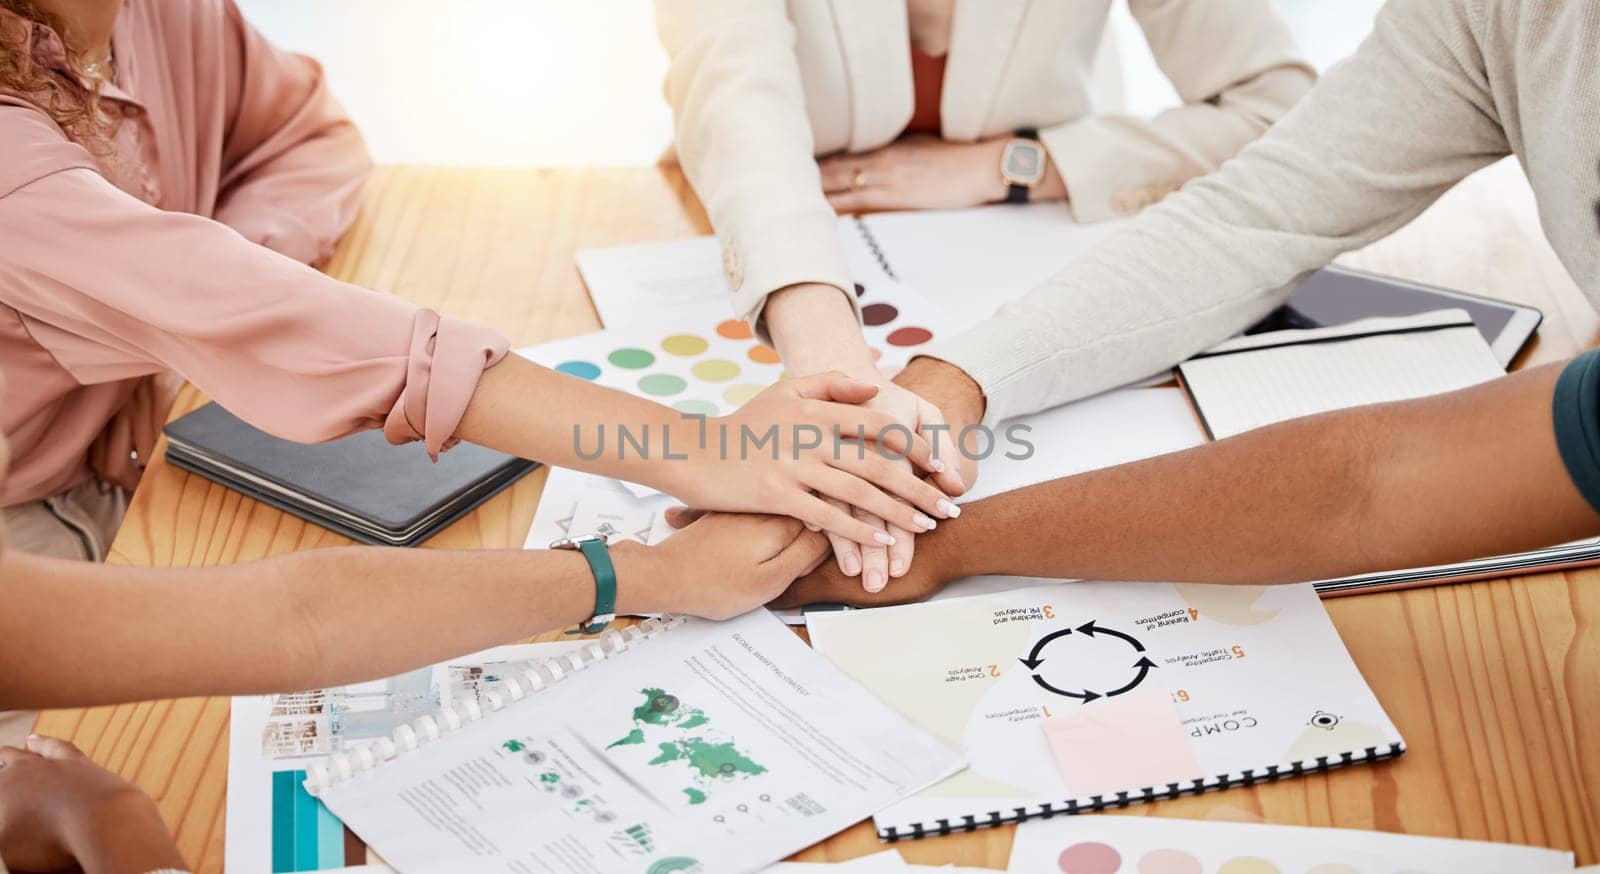 Hands stacked, business and creative people for brand development, project goals and teamwork on documents. Together sign, meeting and graphic designer, marketing agency or person in collaboration.